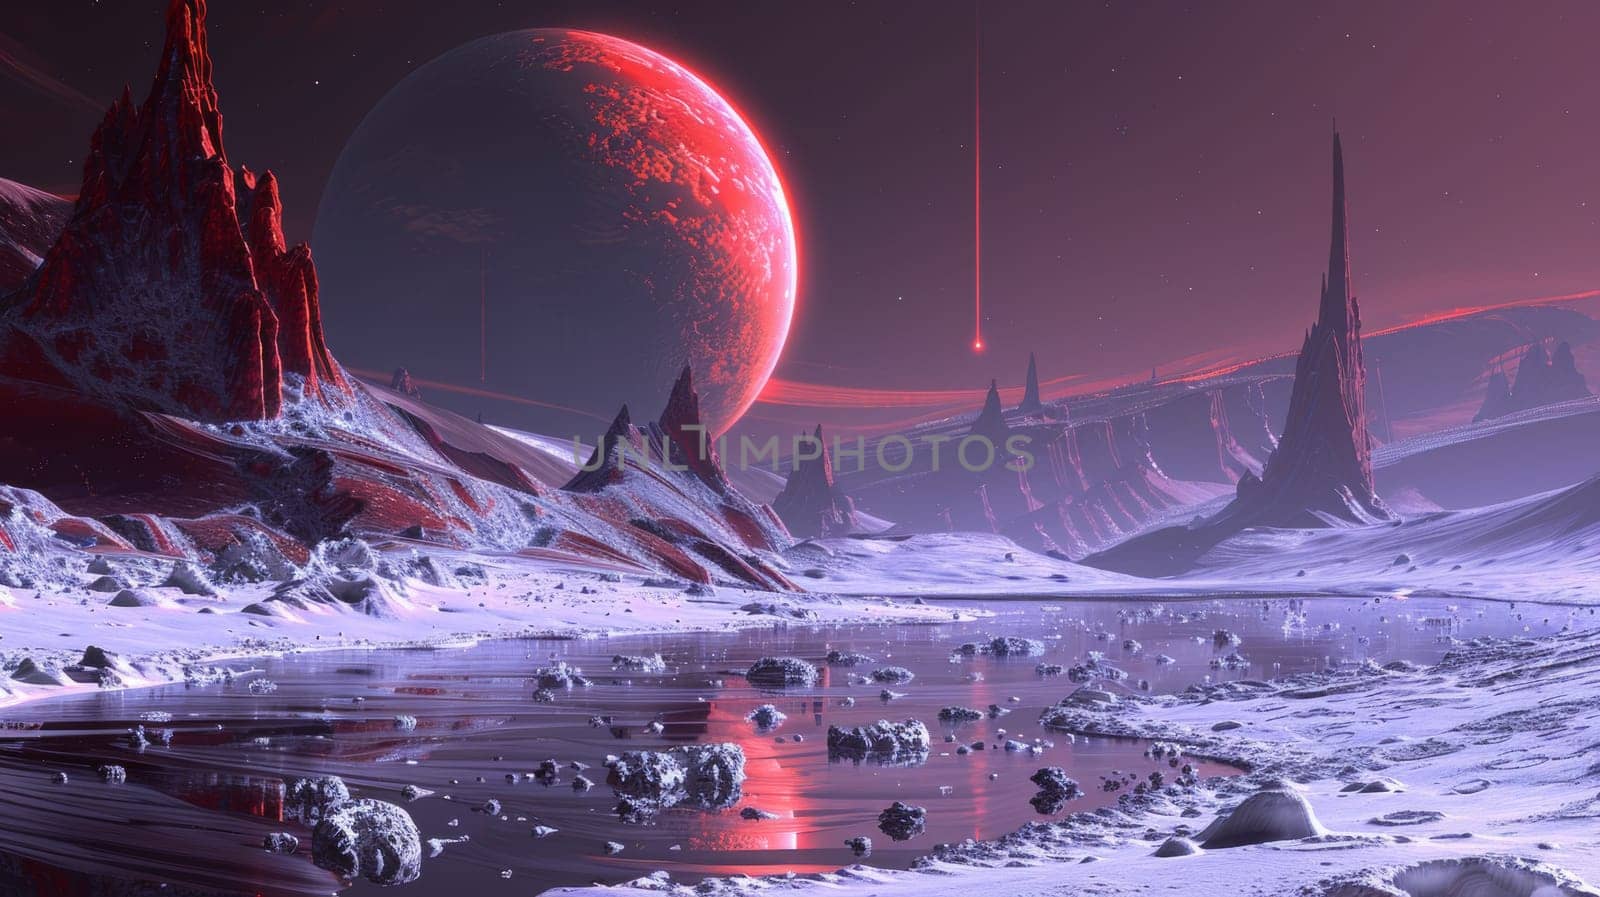 A red planet with a moon in the background and snow